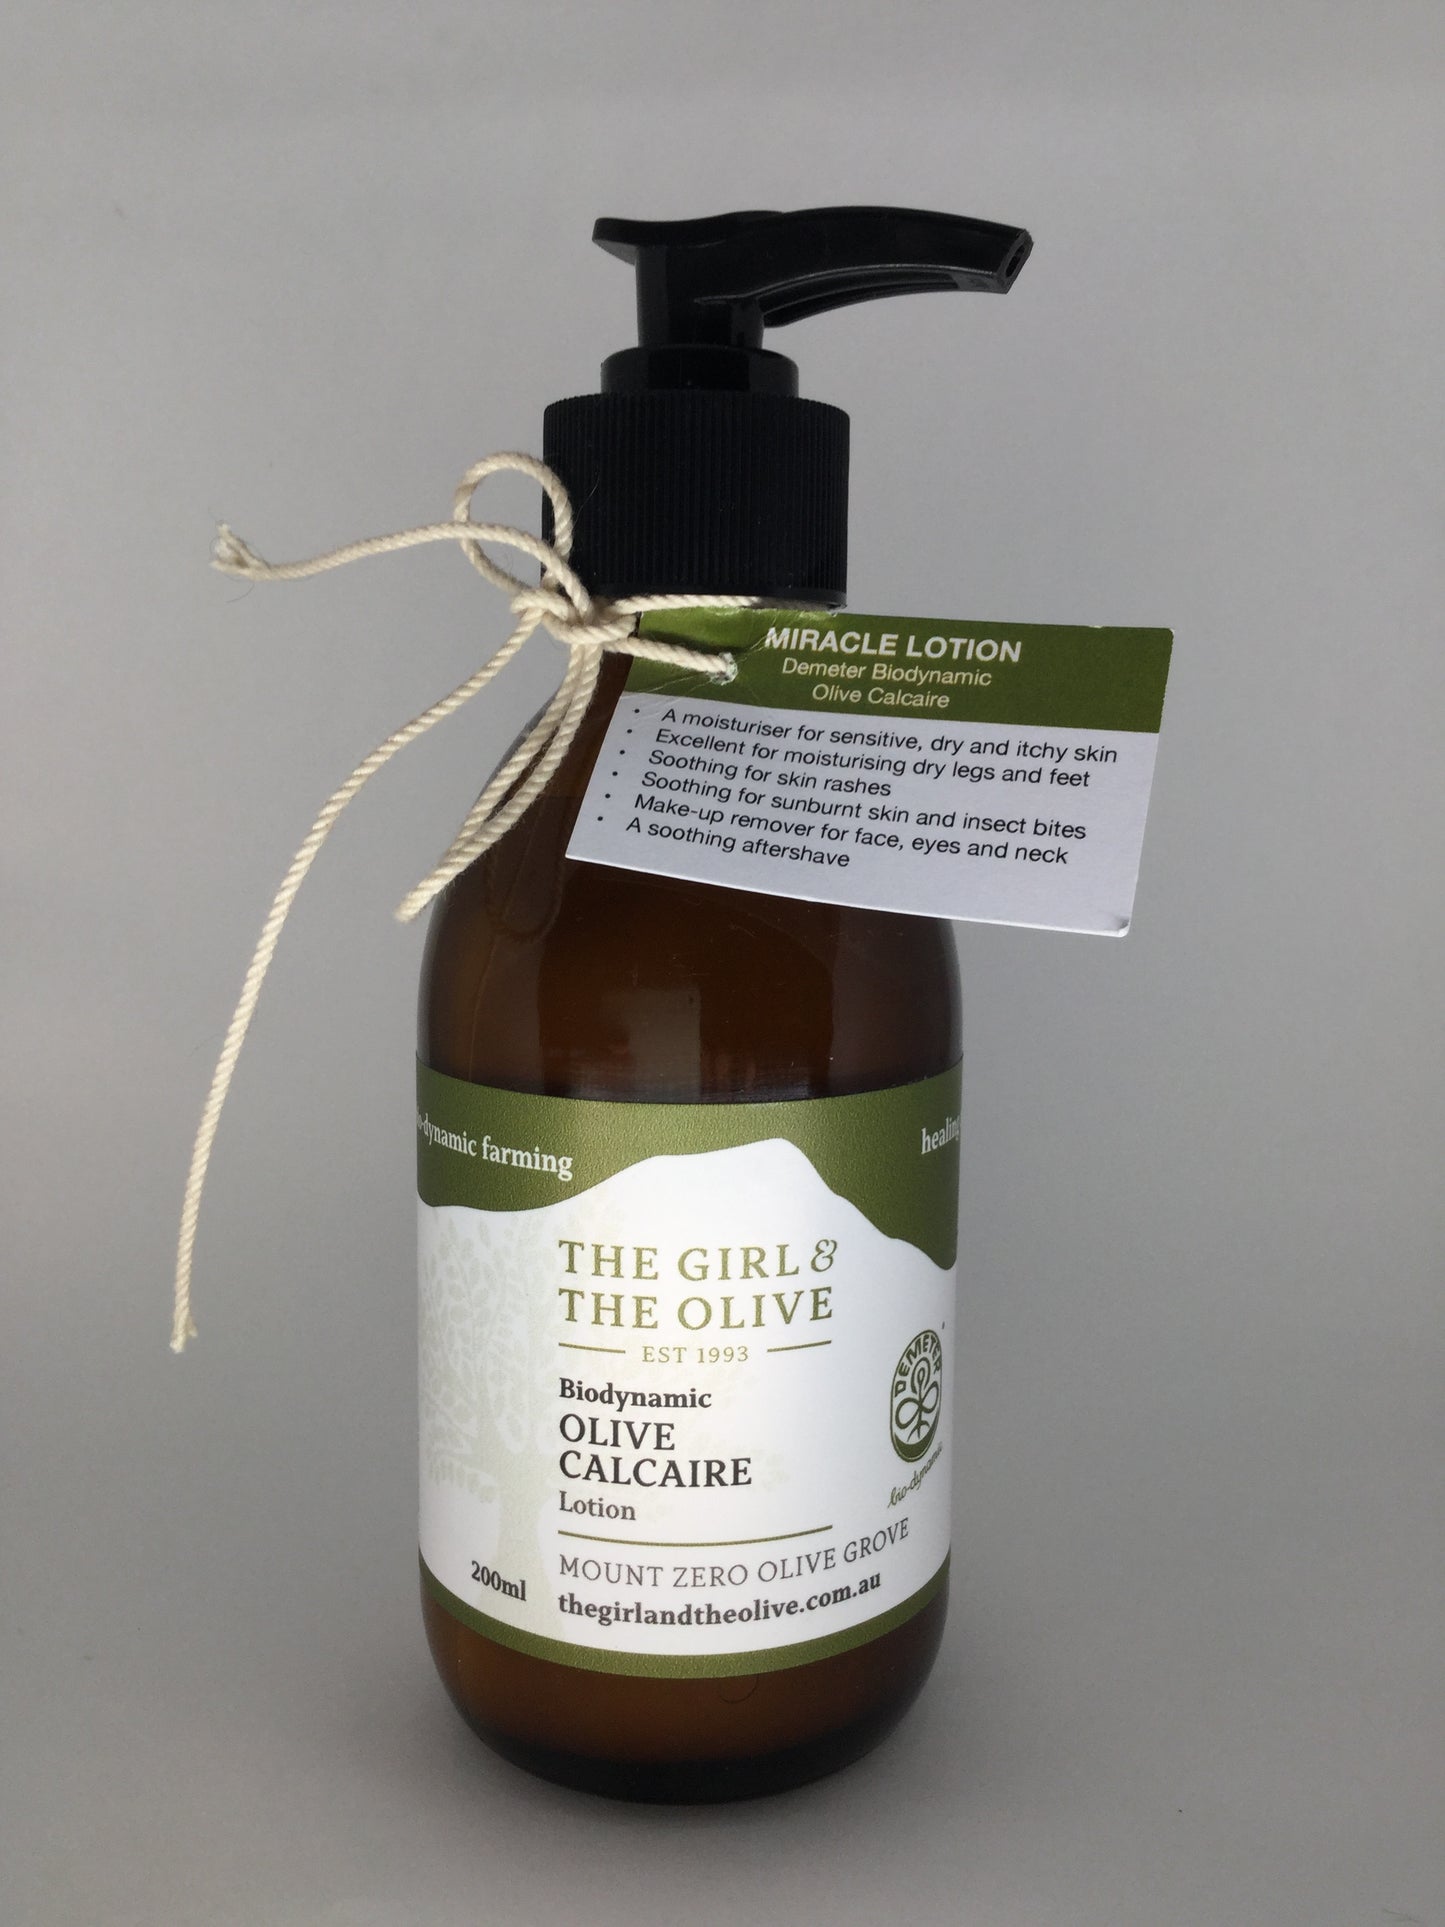 Biodynamic Olive Calcaire Lotion